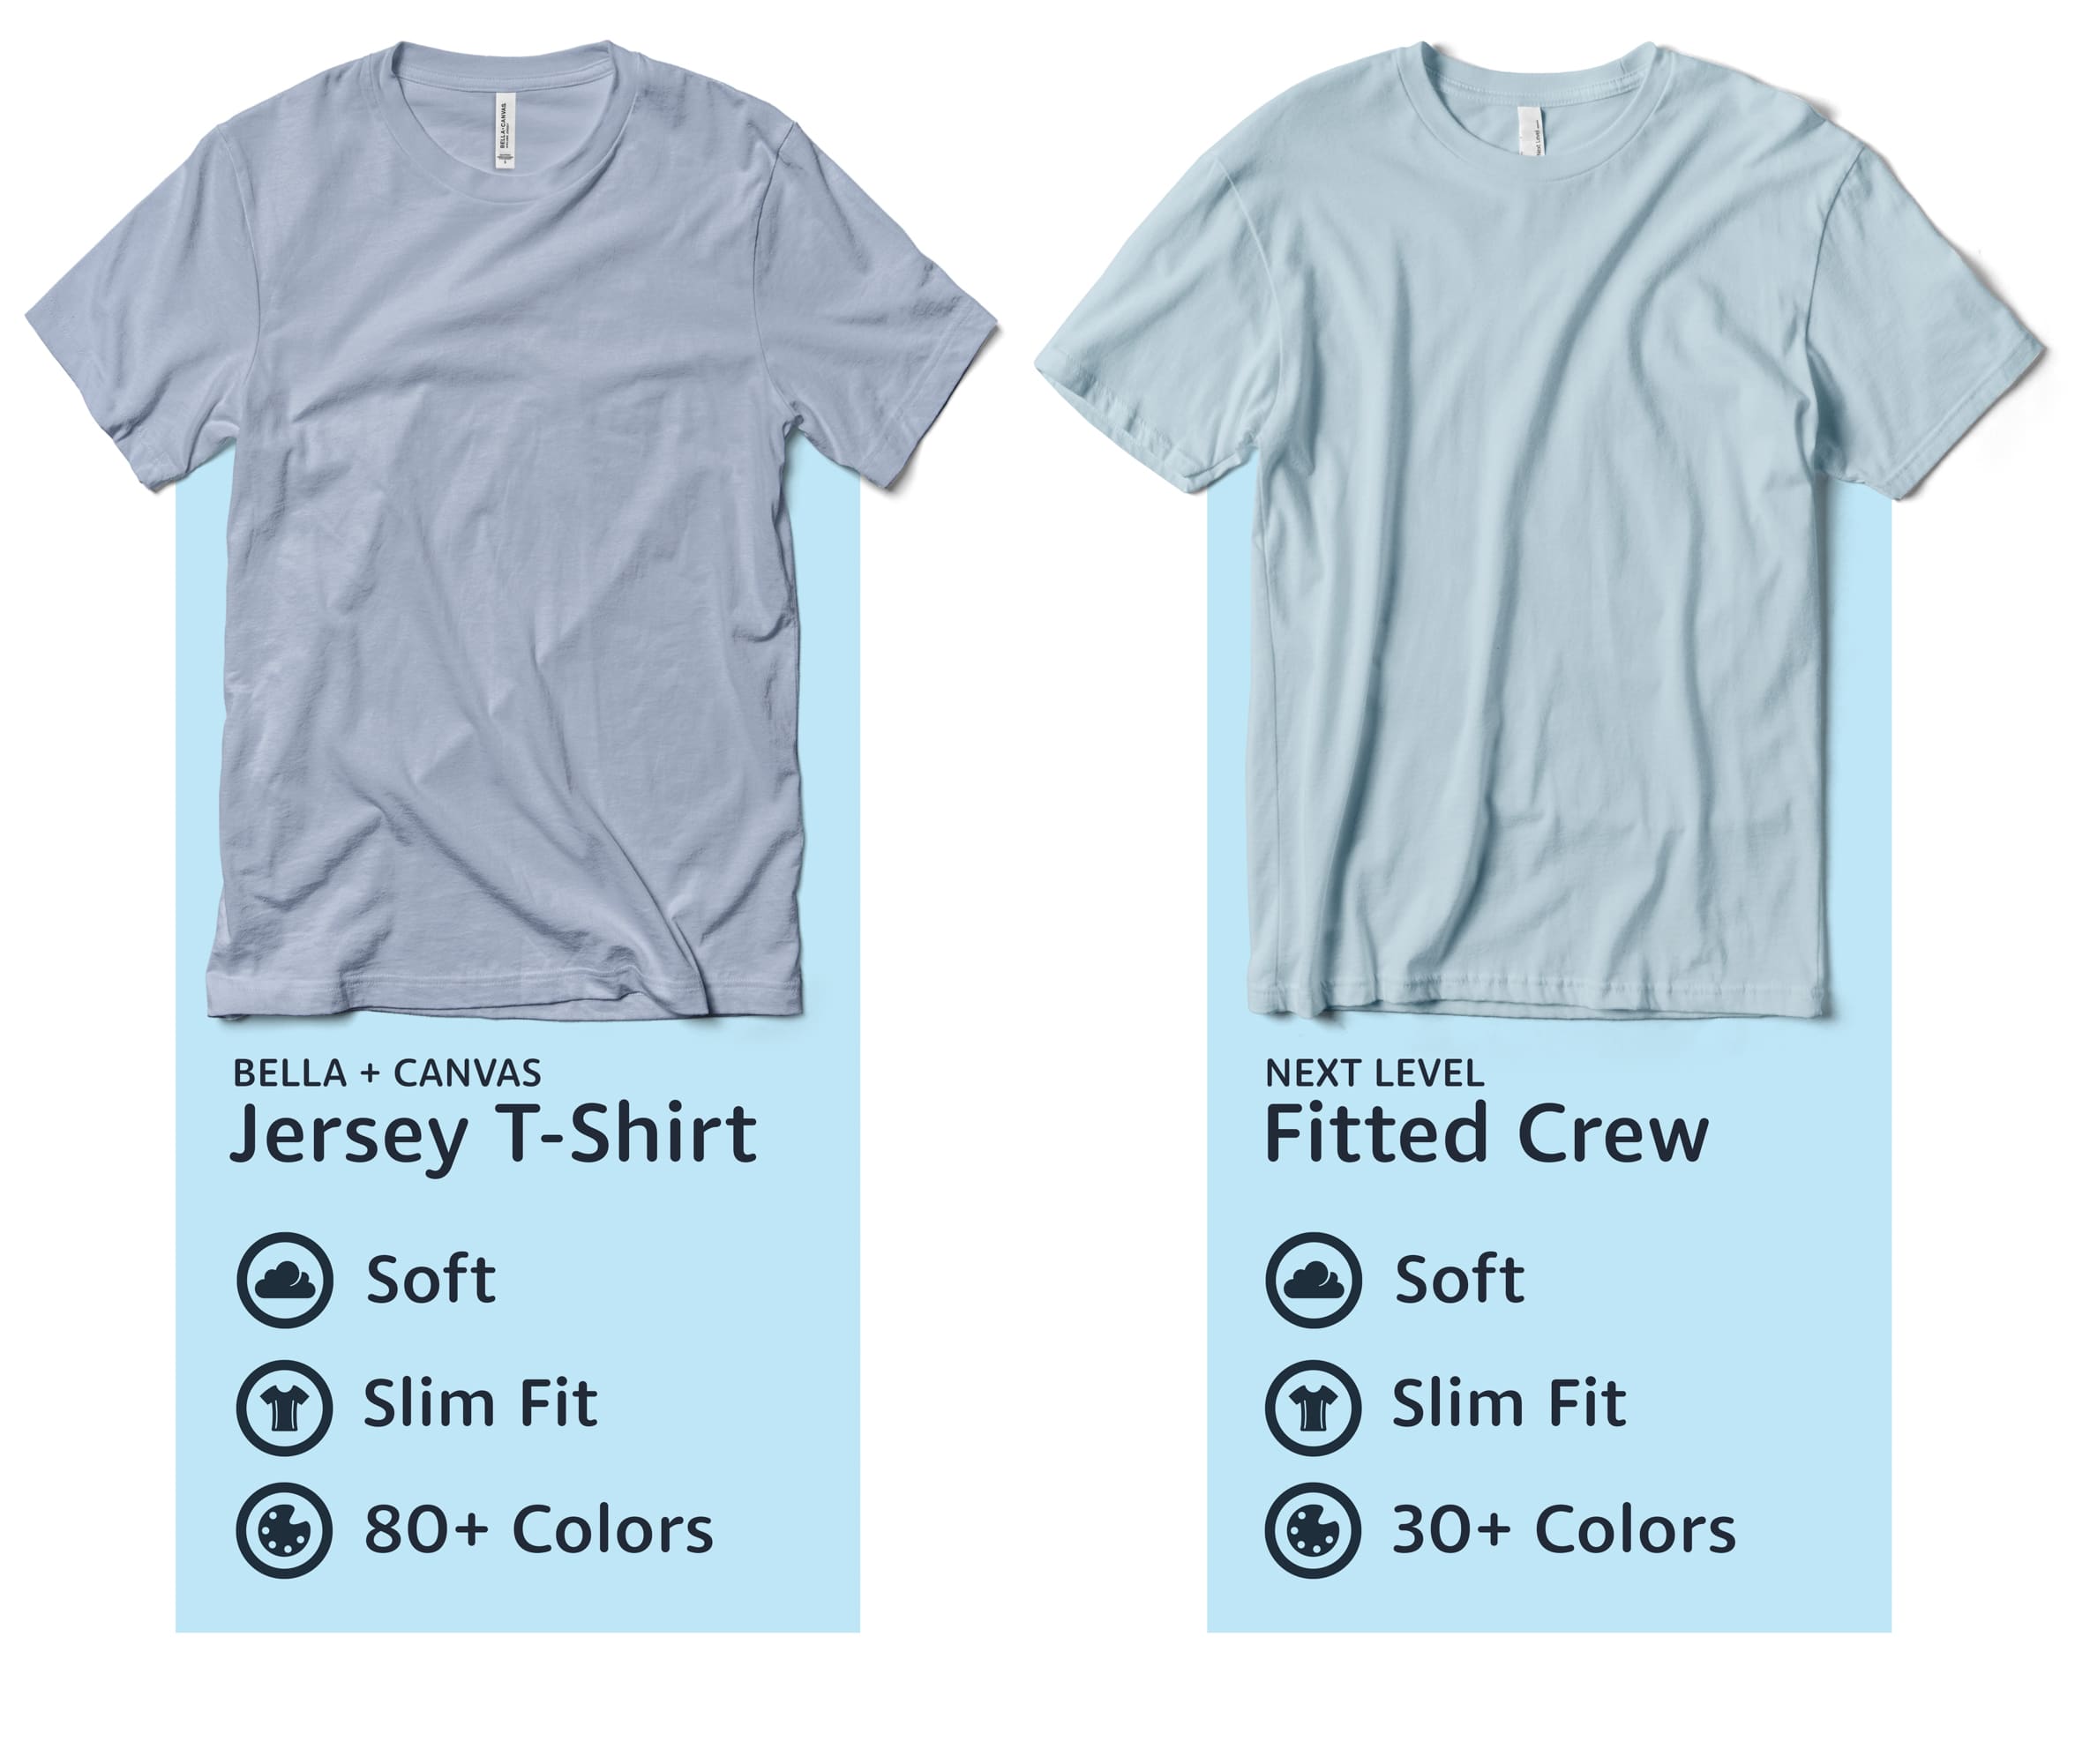 A comparison infographic of the Bella Canvas Jersey T-Shirt and the Next Level Fitted Crew